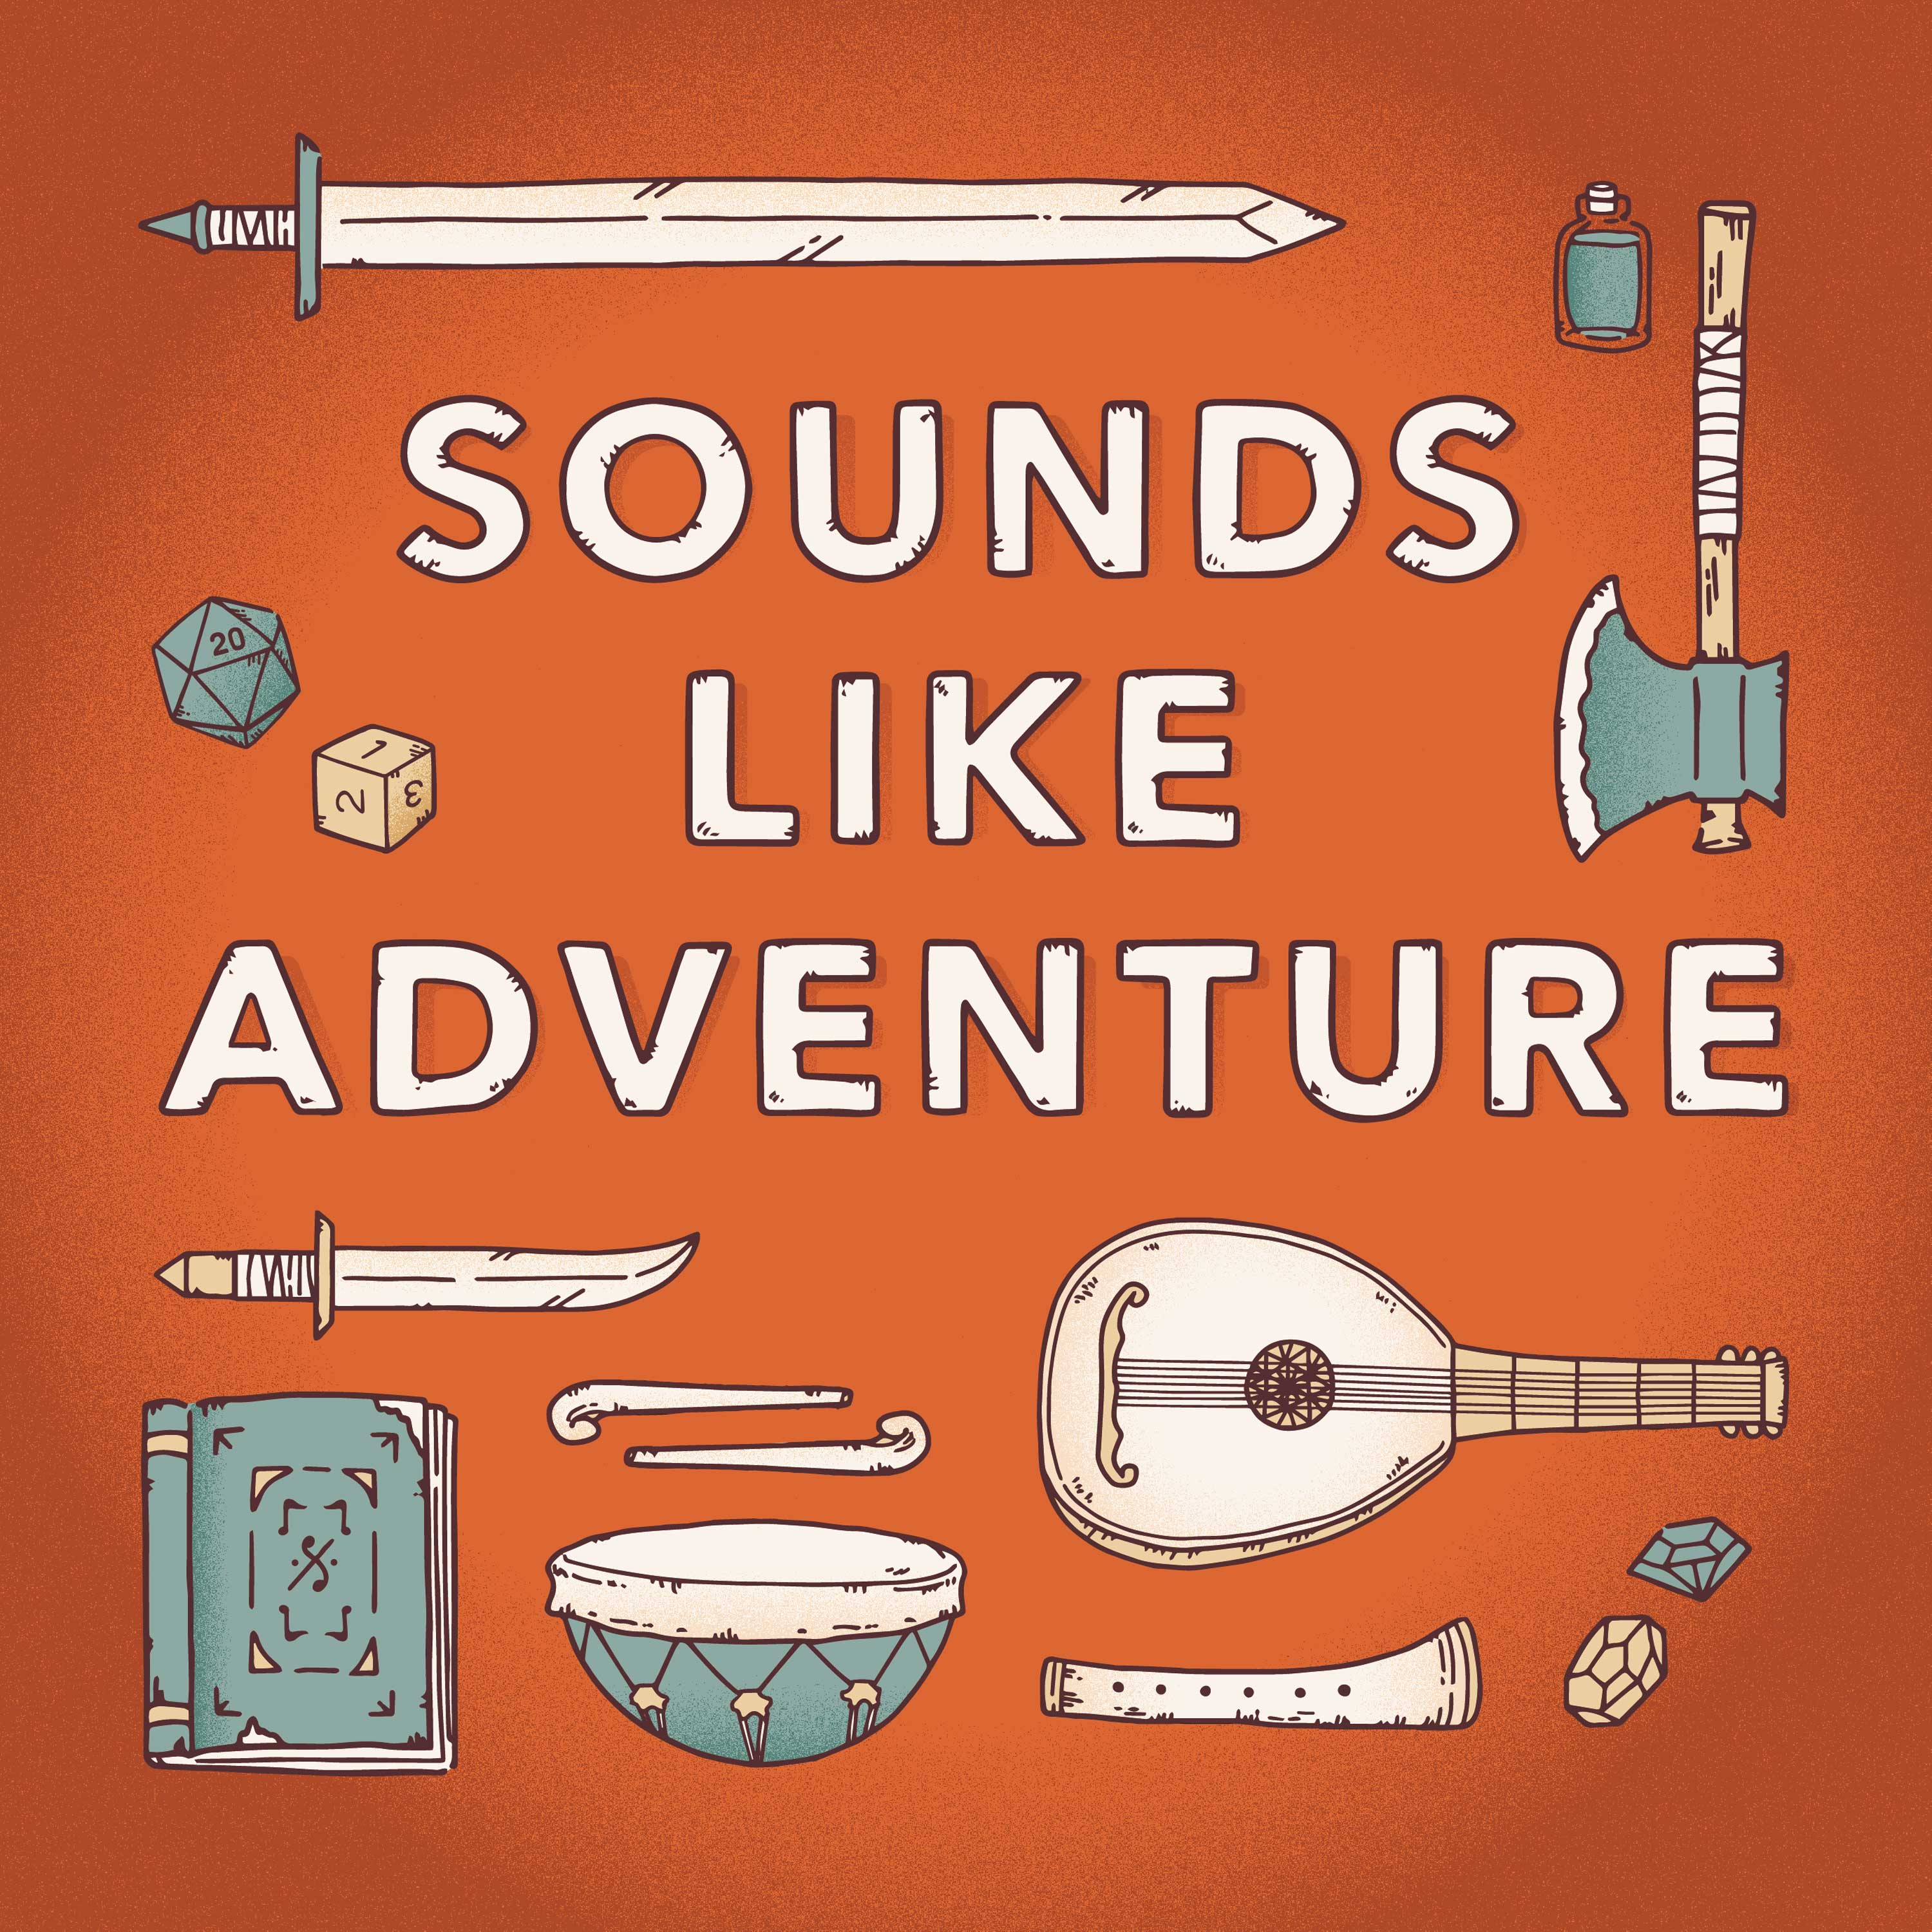 Bonus: Introducing the first new Sounds Like Adventure cast member